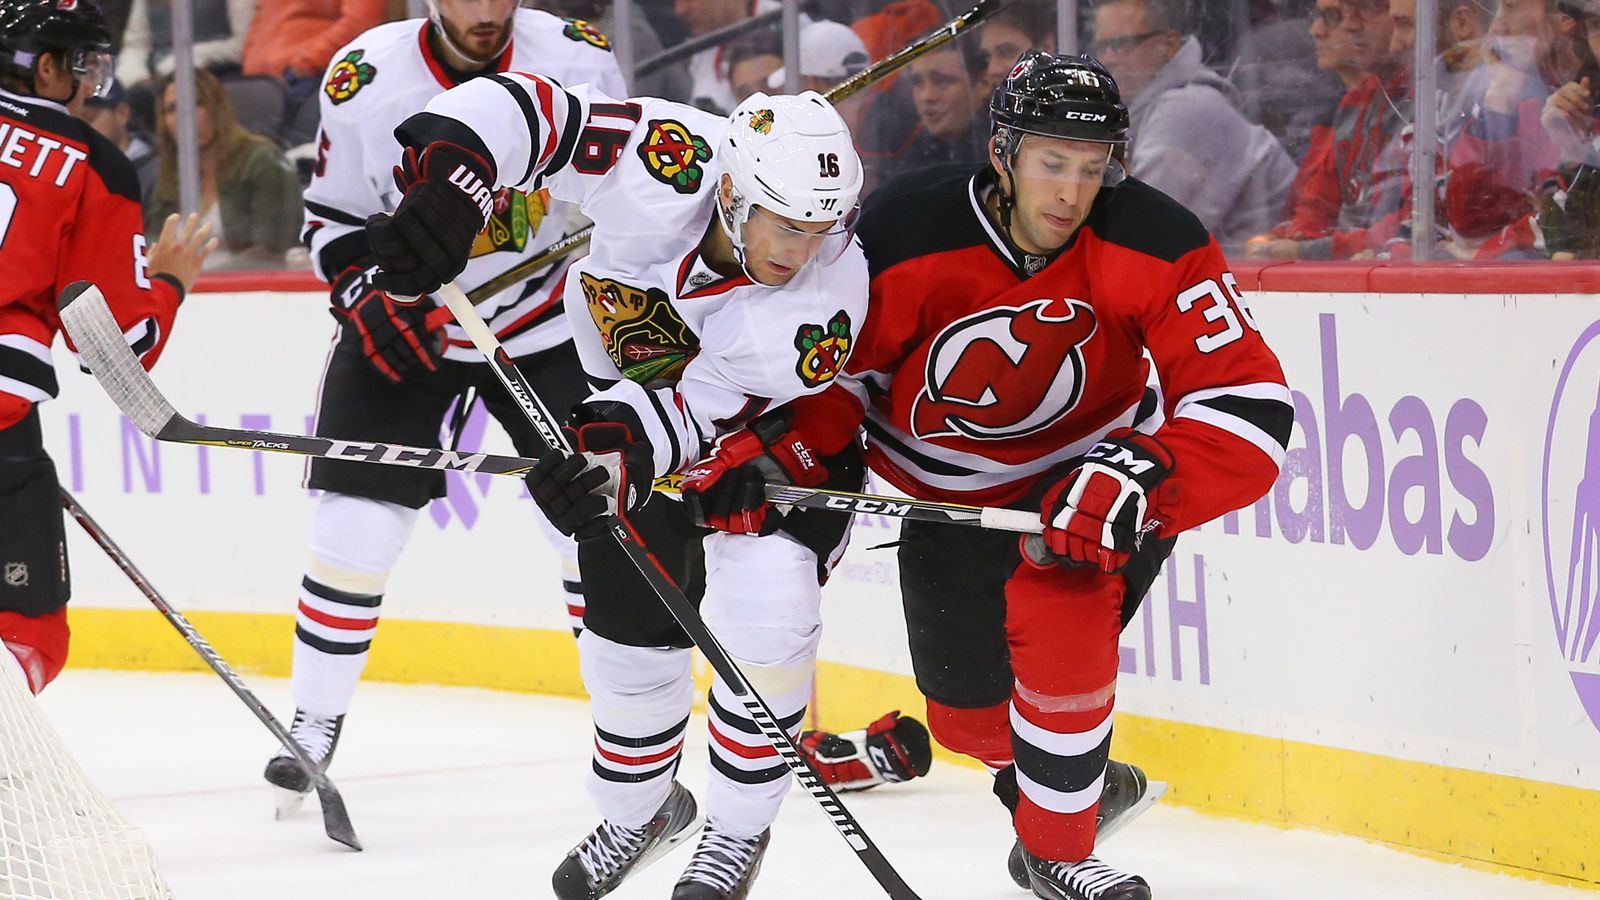 The New Jersey Devils will visit the Chicago Blackhawks in the third game o...